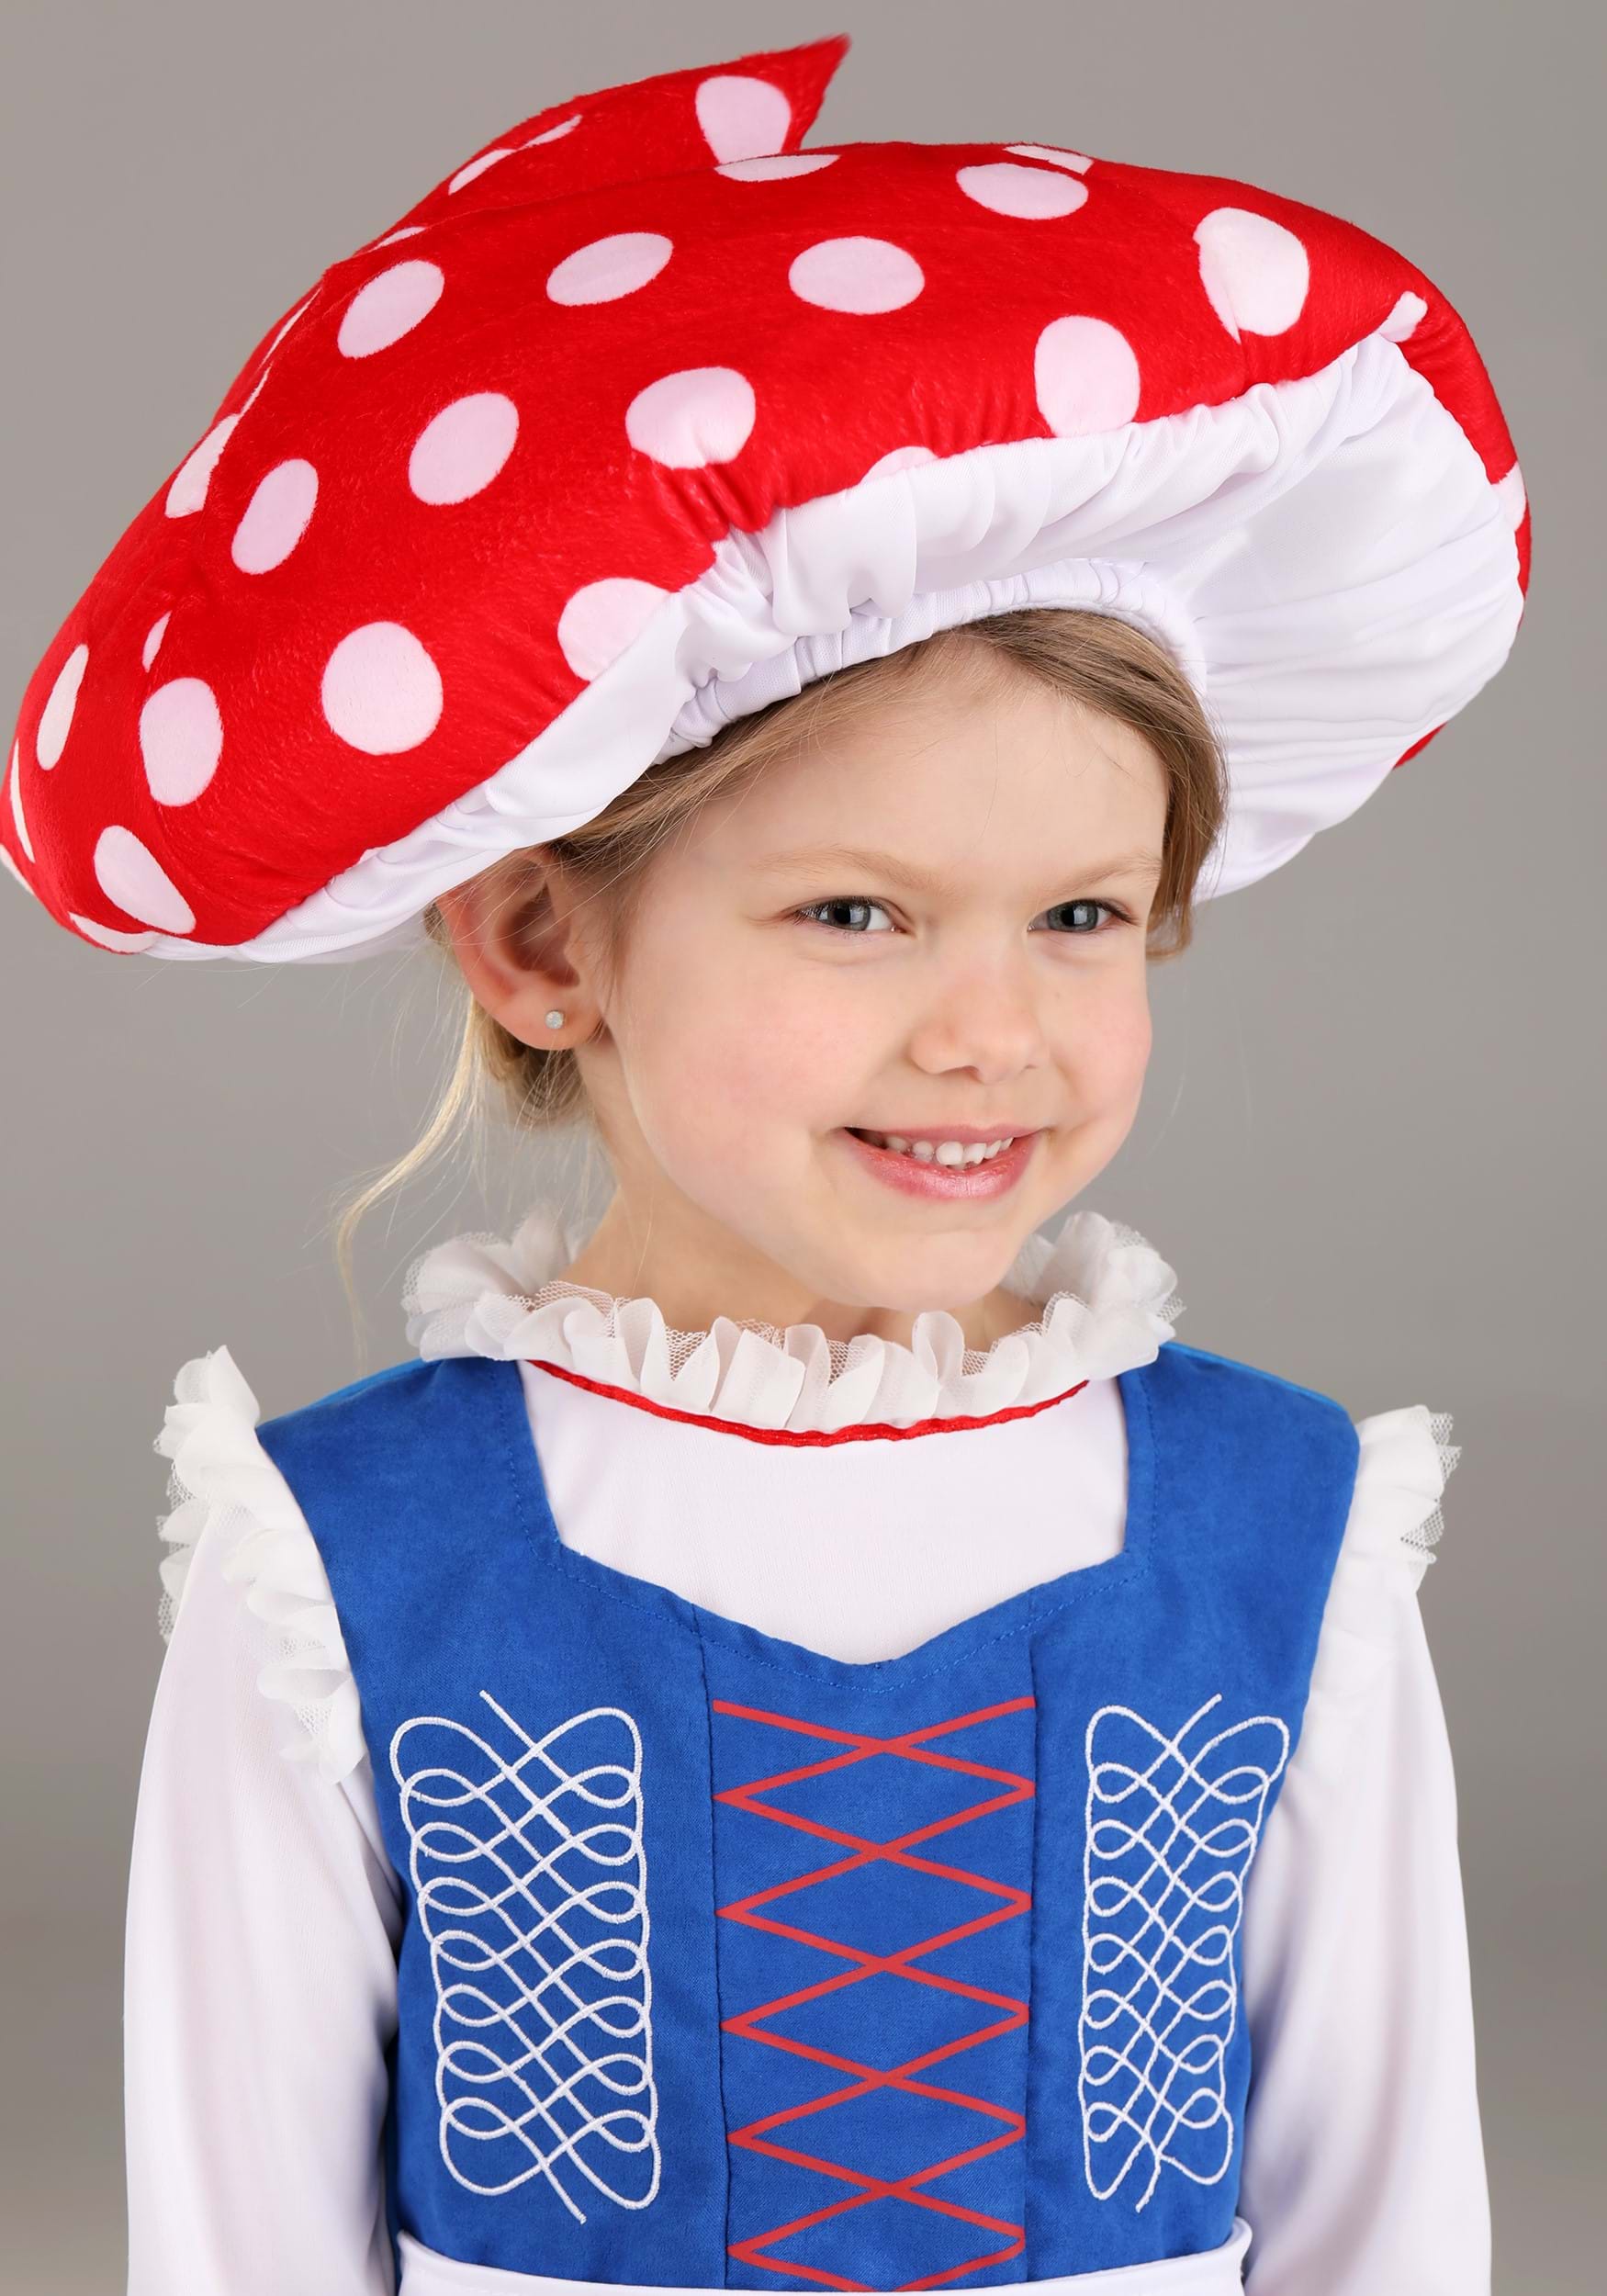 Gentle-Hearted Garden Gnome Toddler Costume